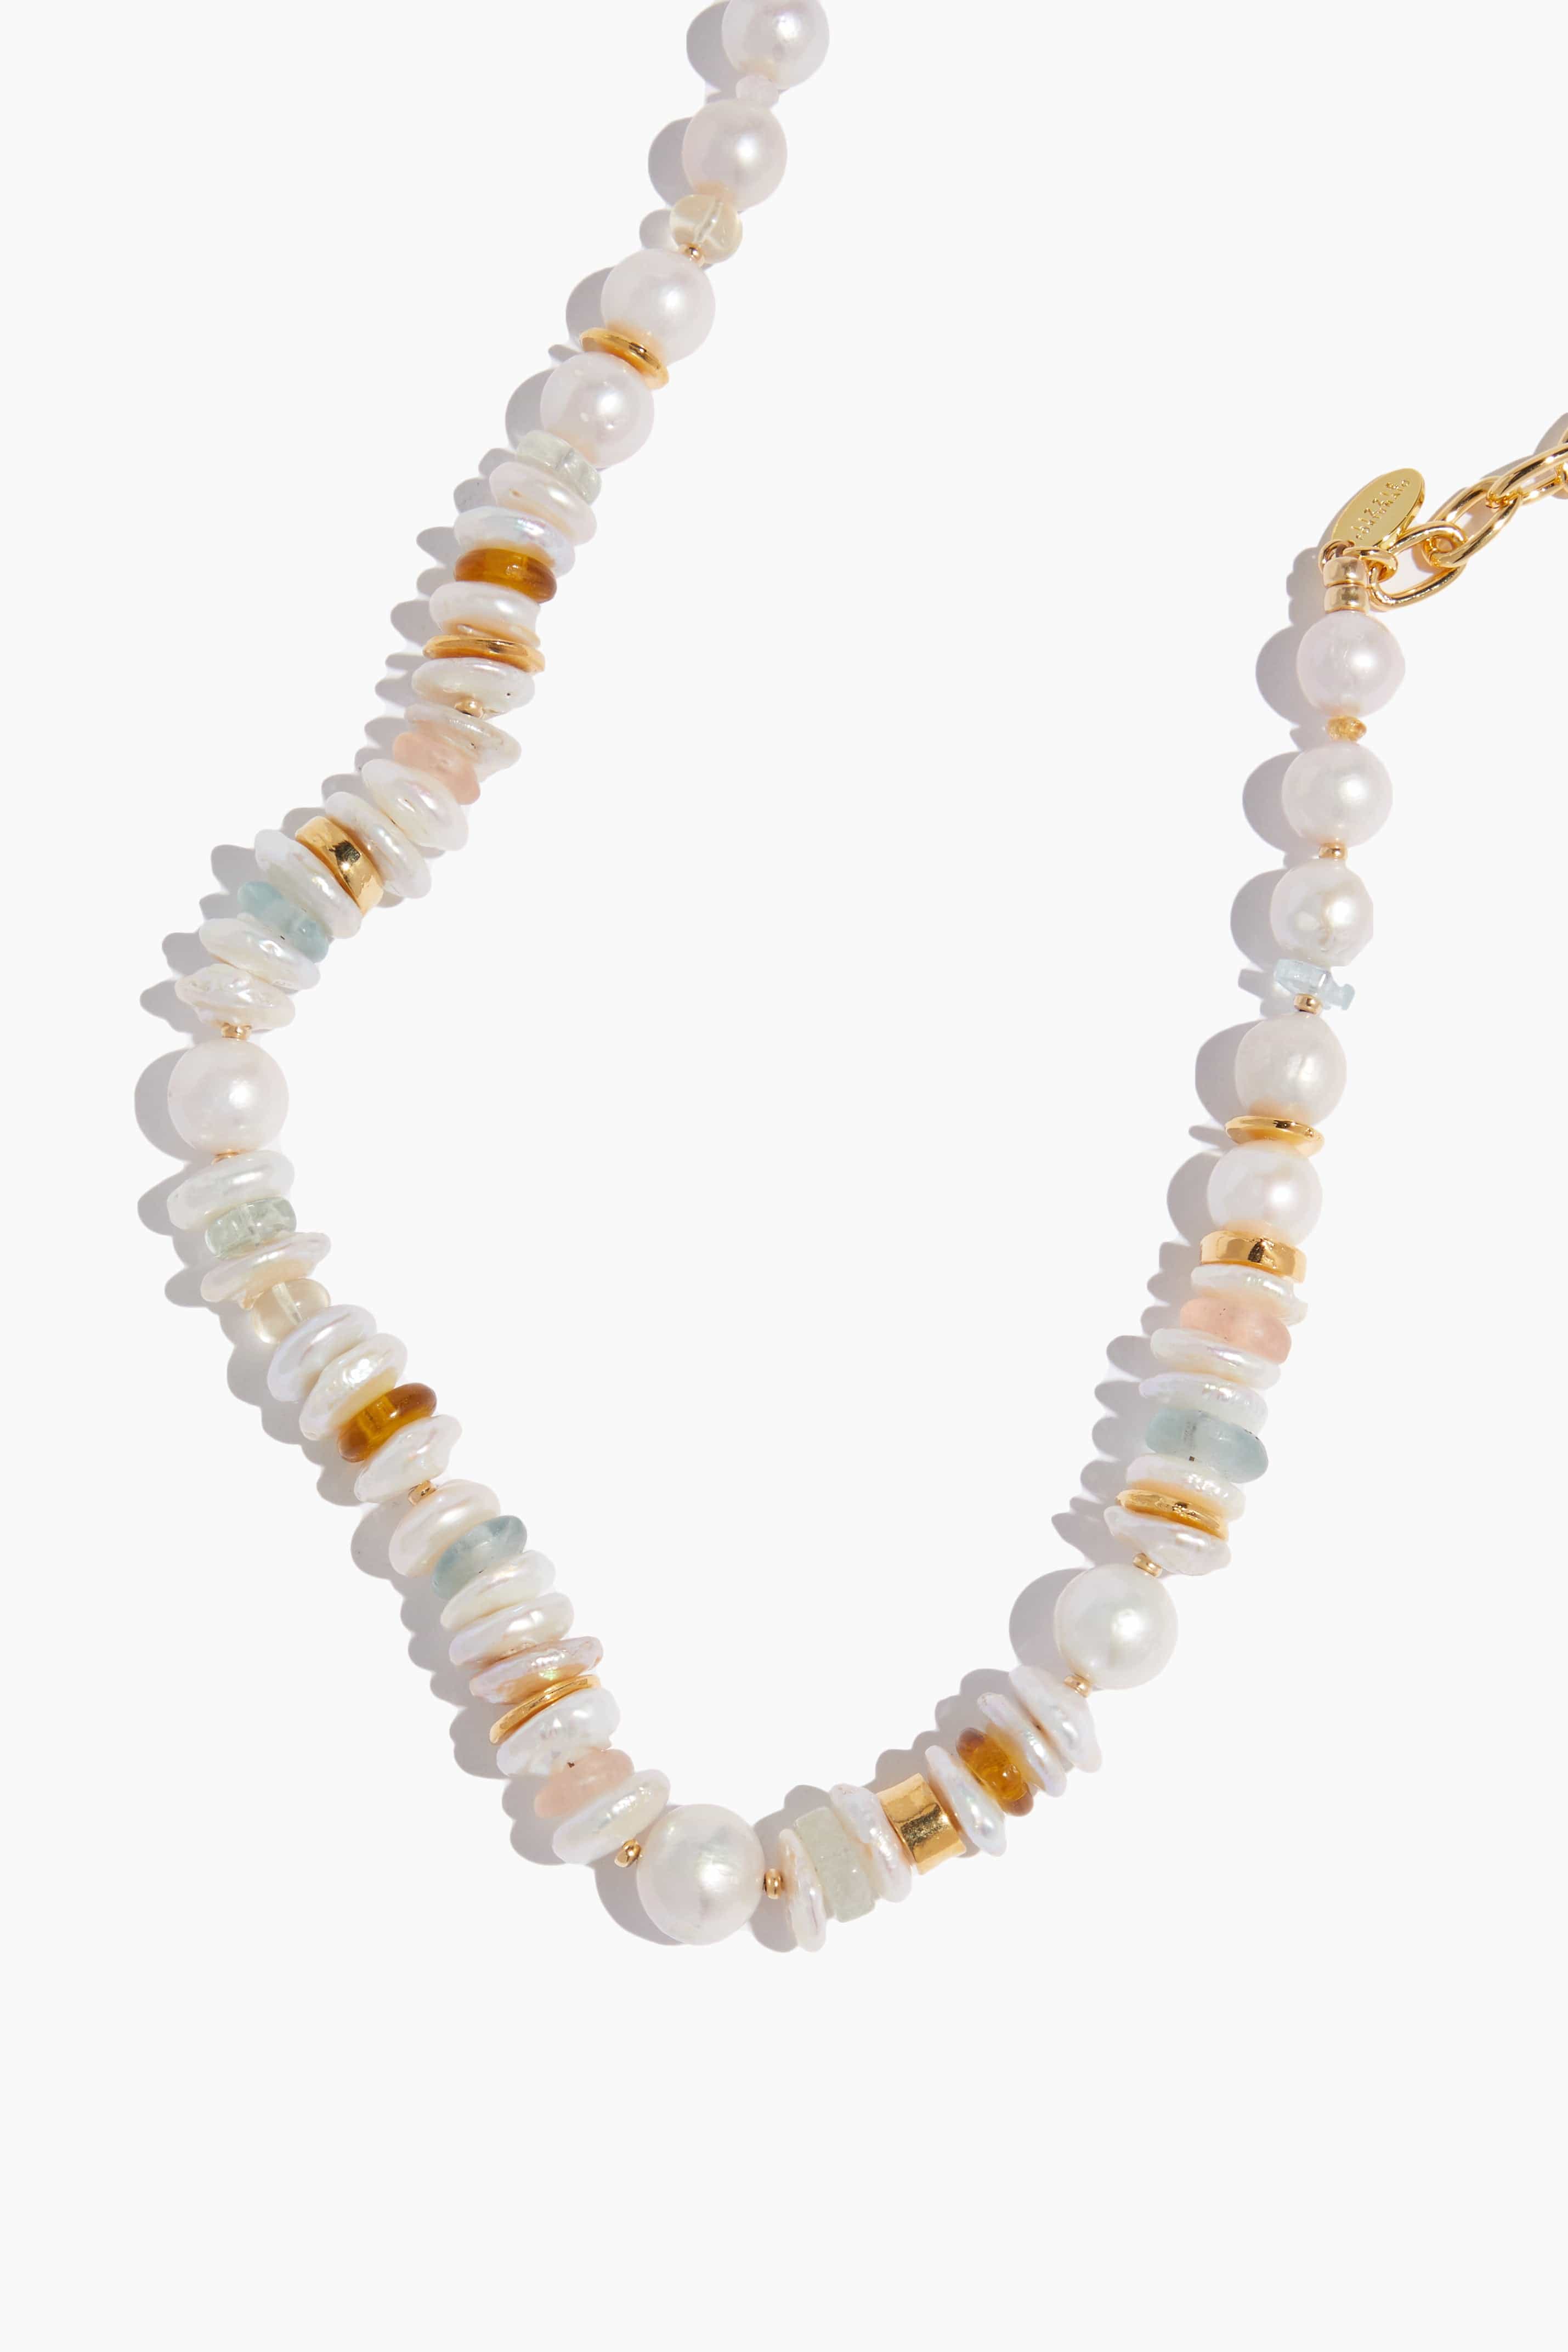 Lizzie Fortunato Necklaces Moonlight Necklace in White